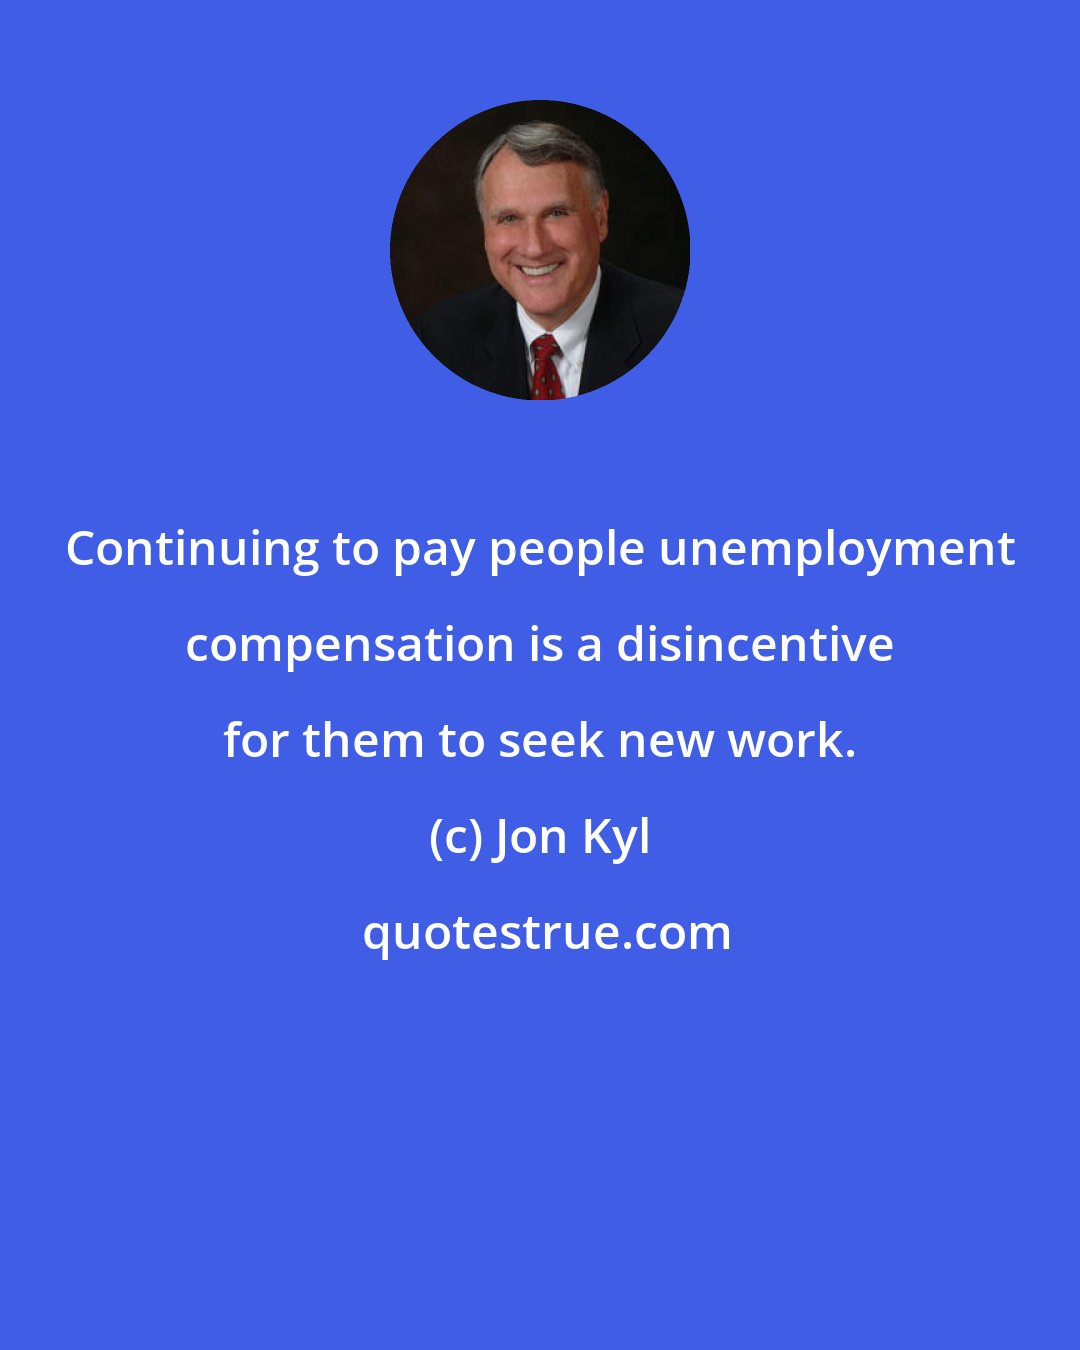 Jon Kyl: Continuing to pay people unemployment compensation is a disincentive for them to seek new work.